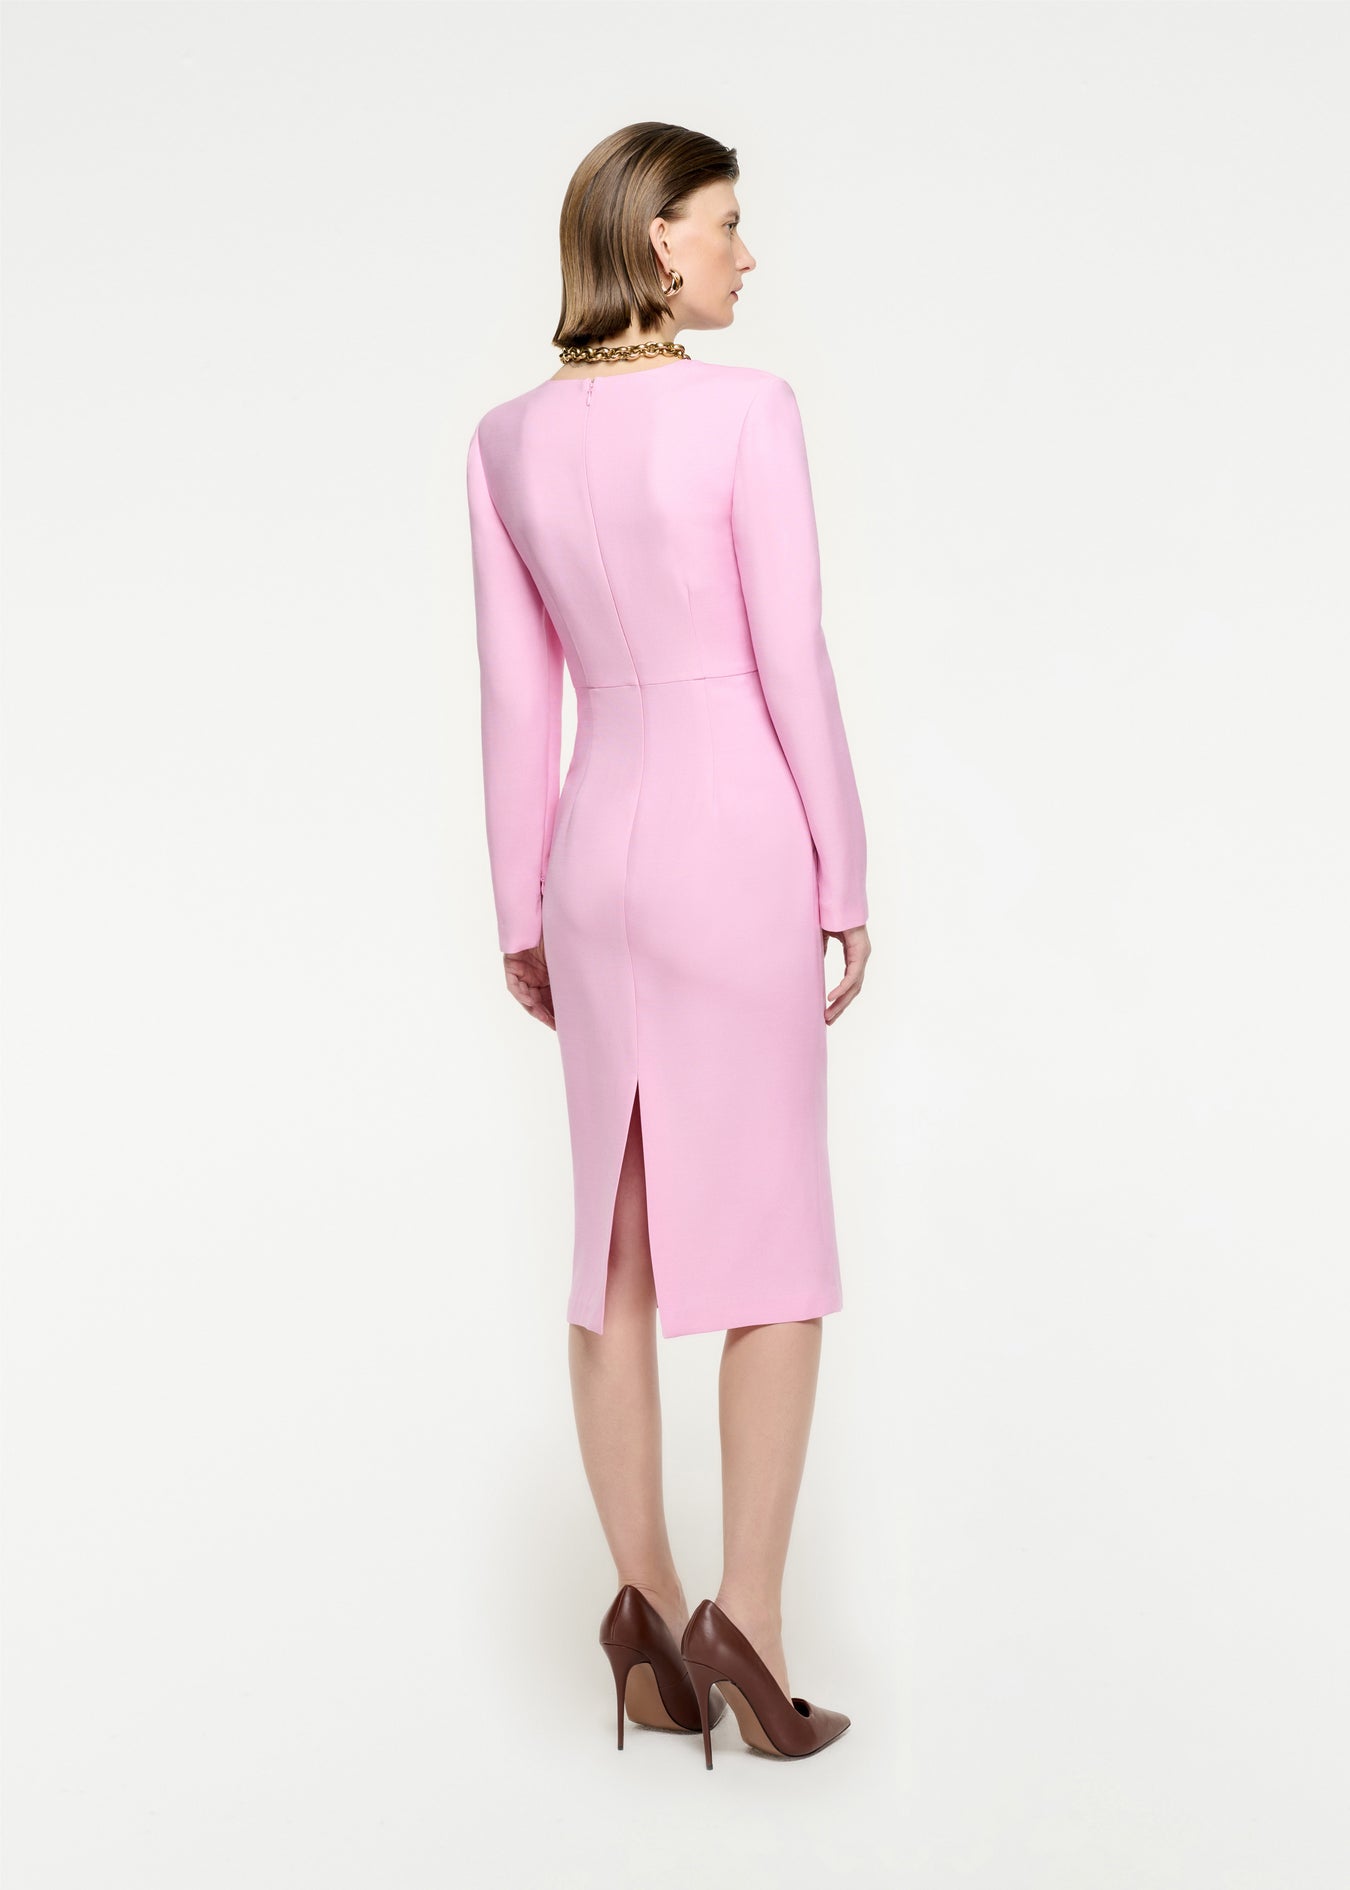 The back of a woman wearing the Long Sleeve Wool Silk Midi Dress in Pink